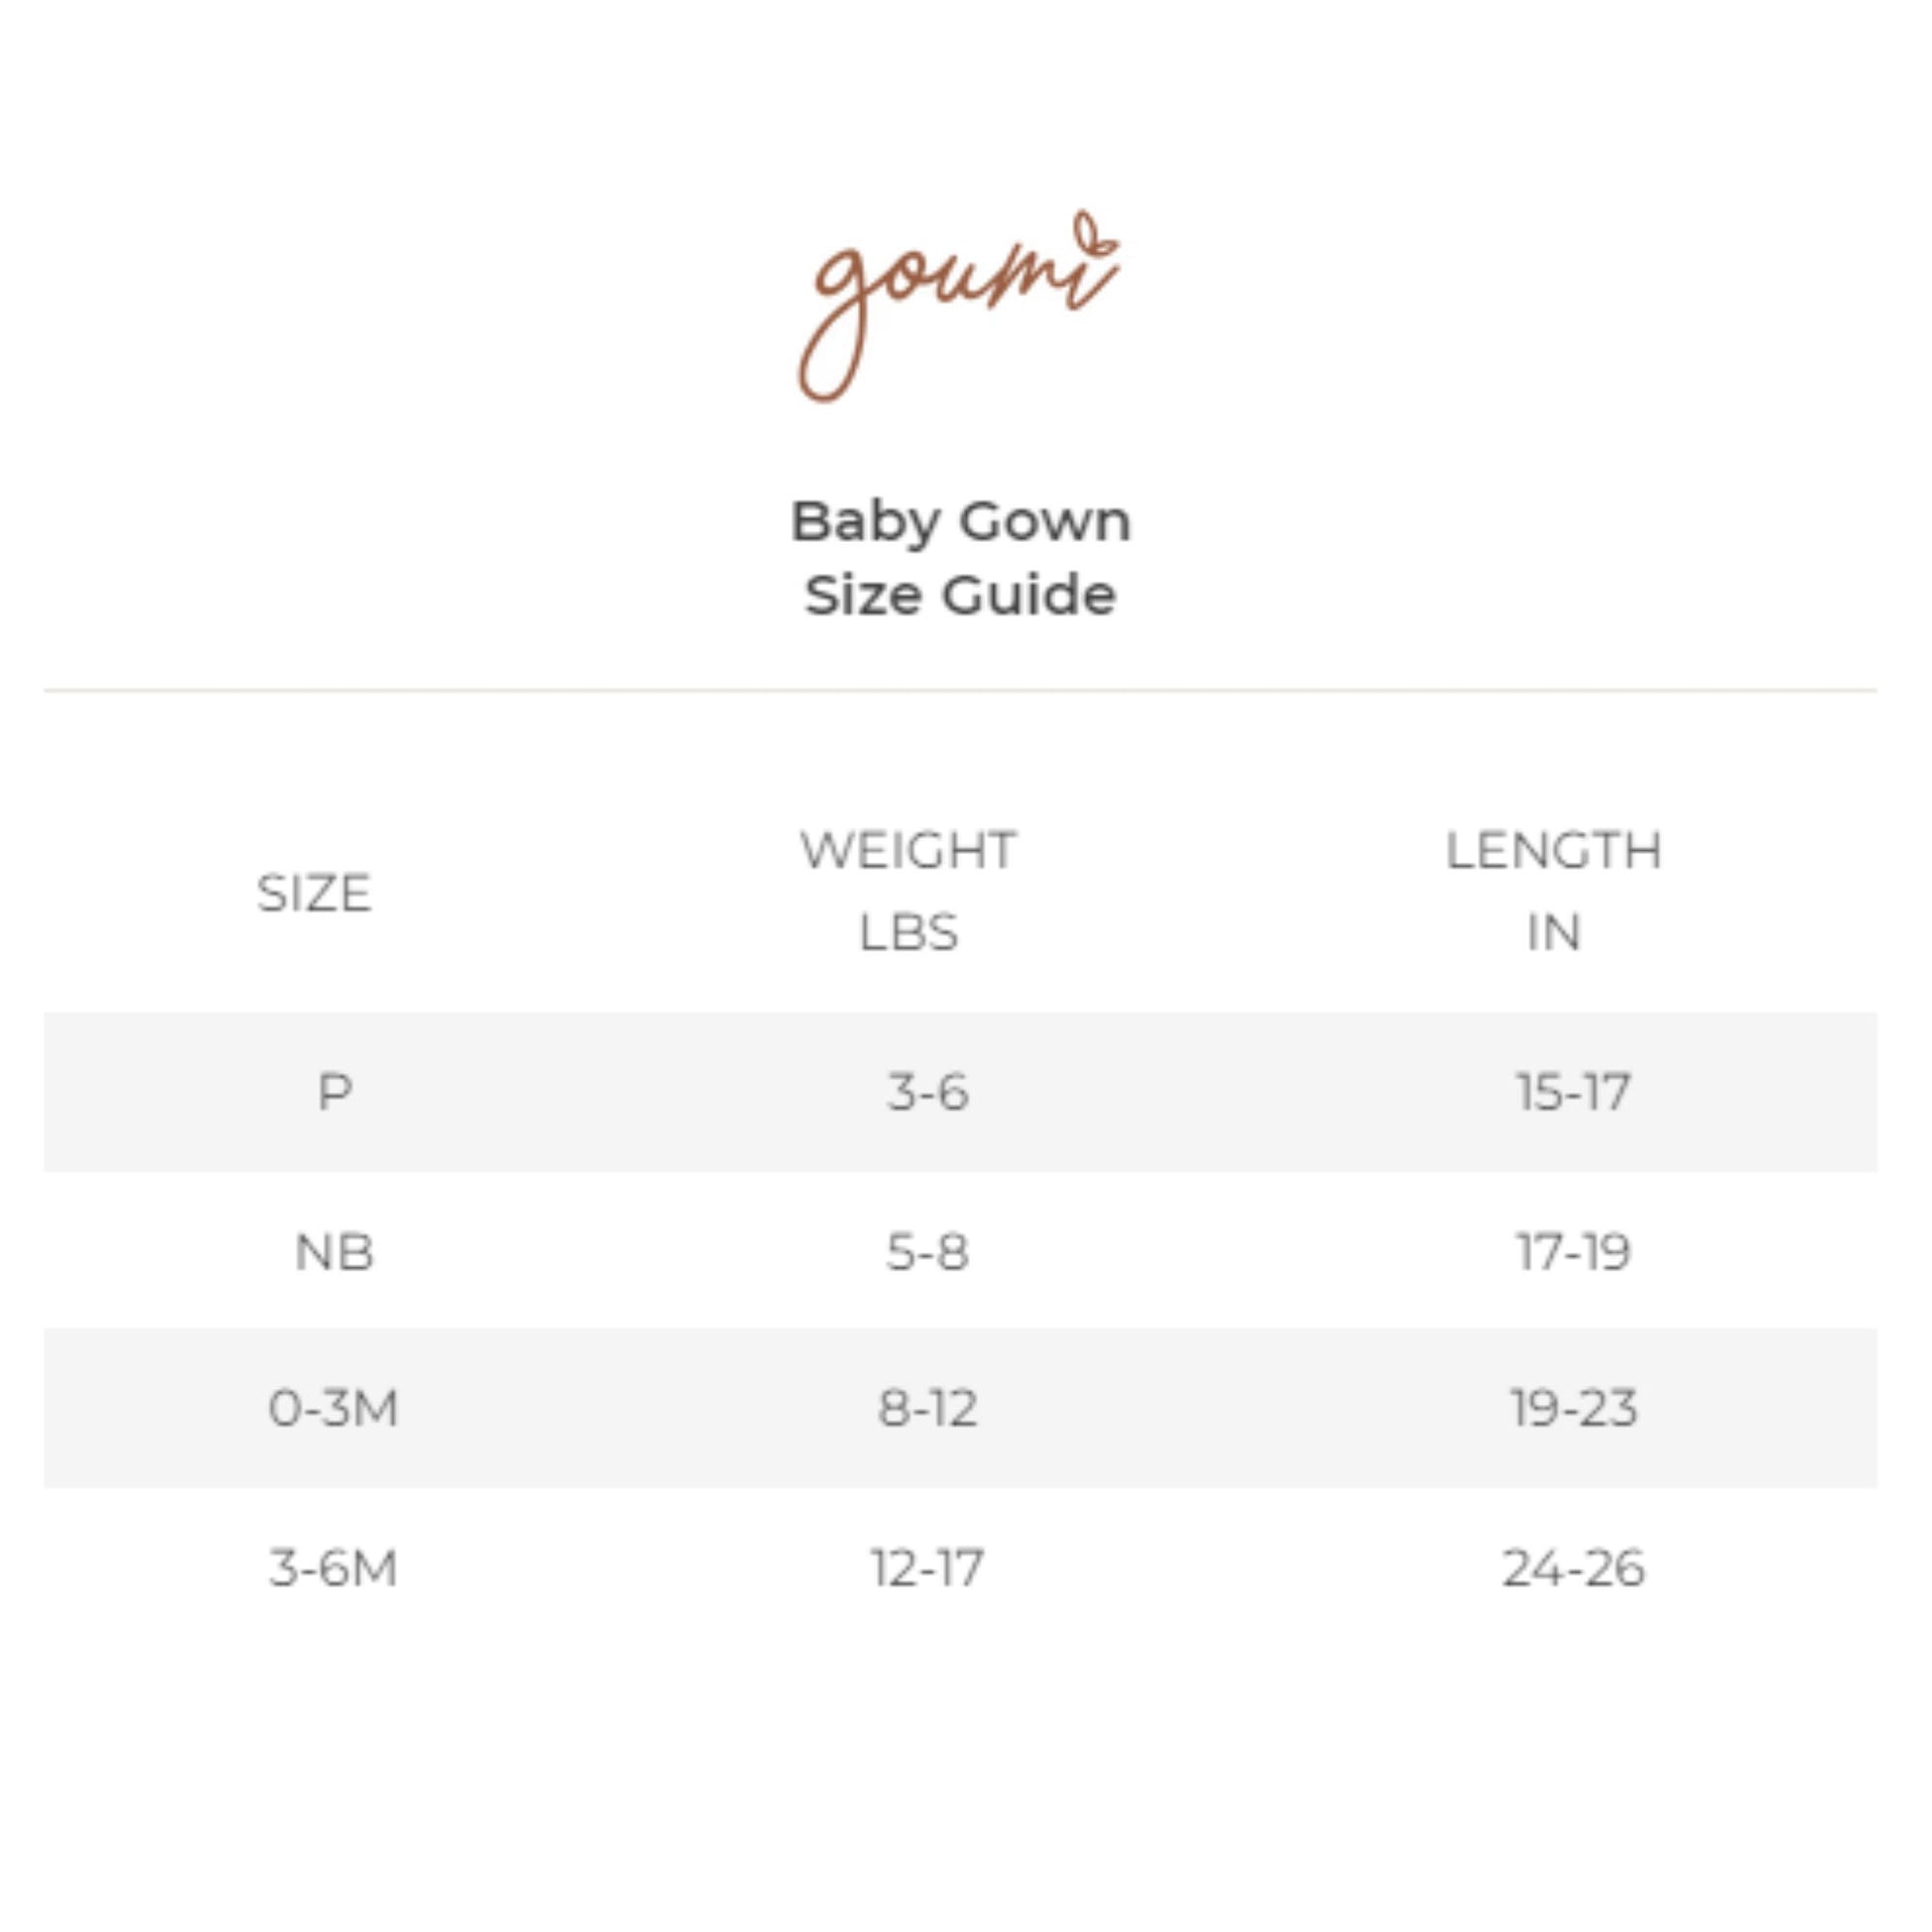 goumikids Gown - Trail Mix size guide